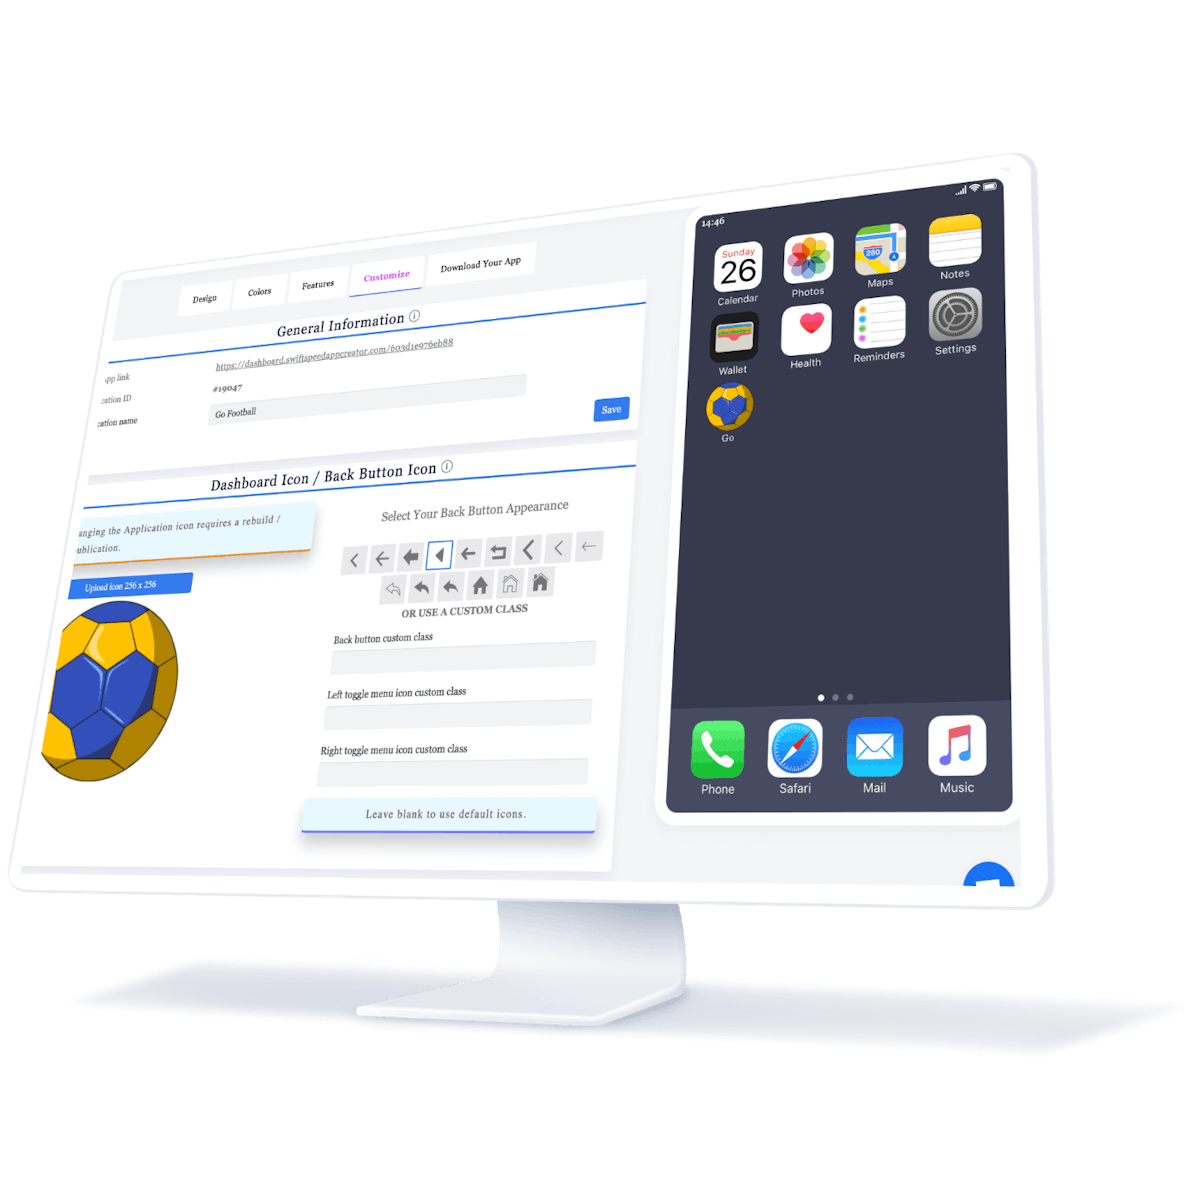 featured image - Swiftspeed: Revolutionalizing App Development With Their New AI App Builder: How It Works